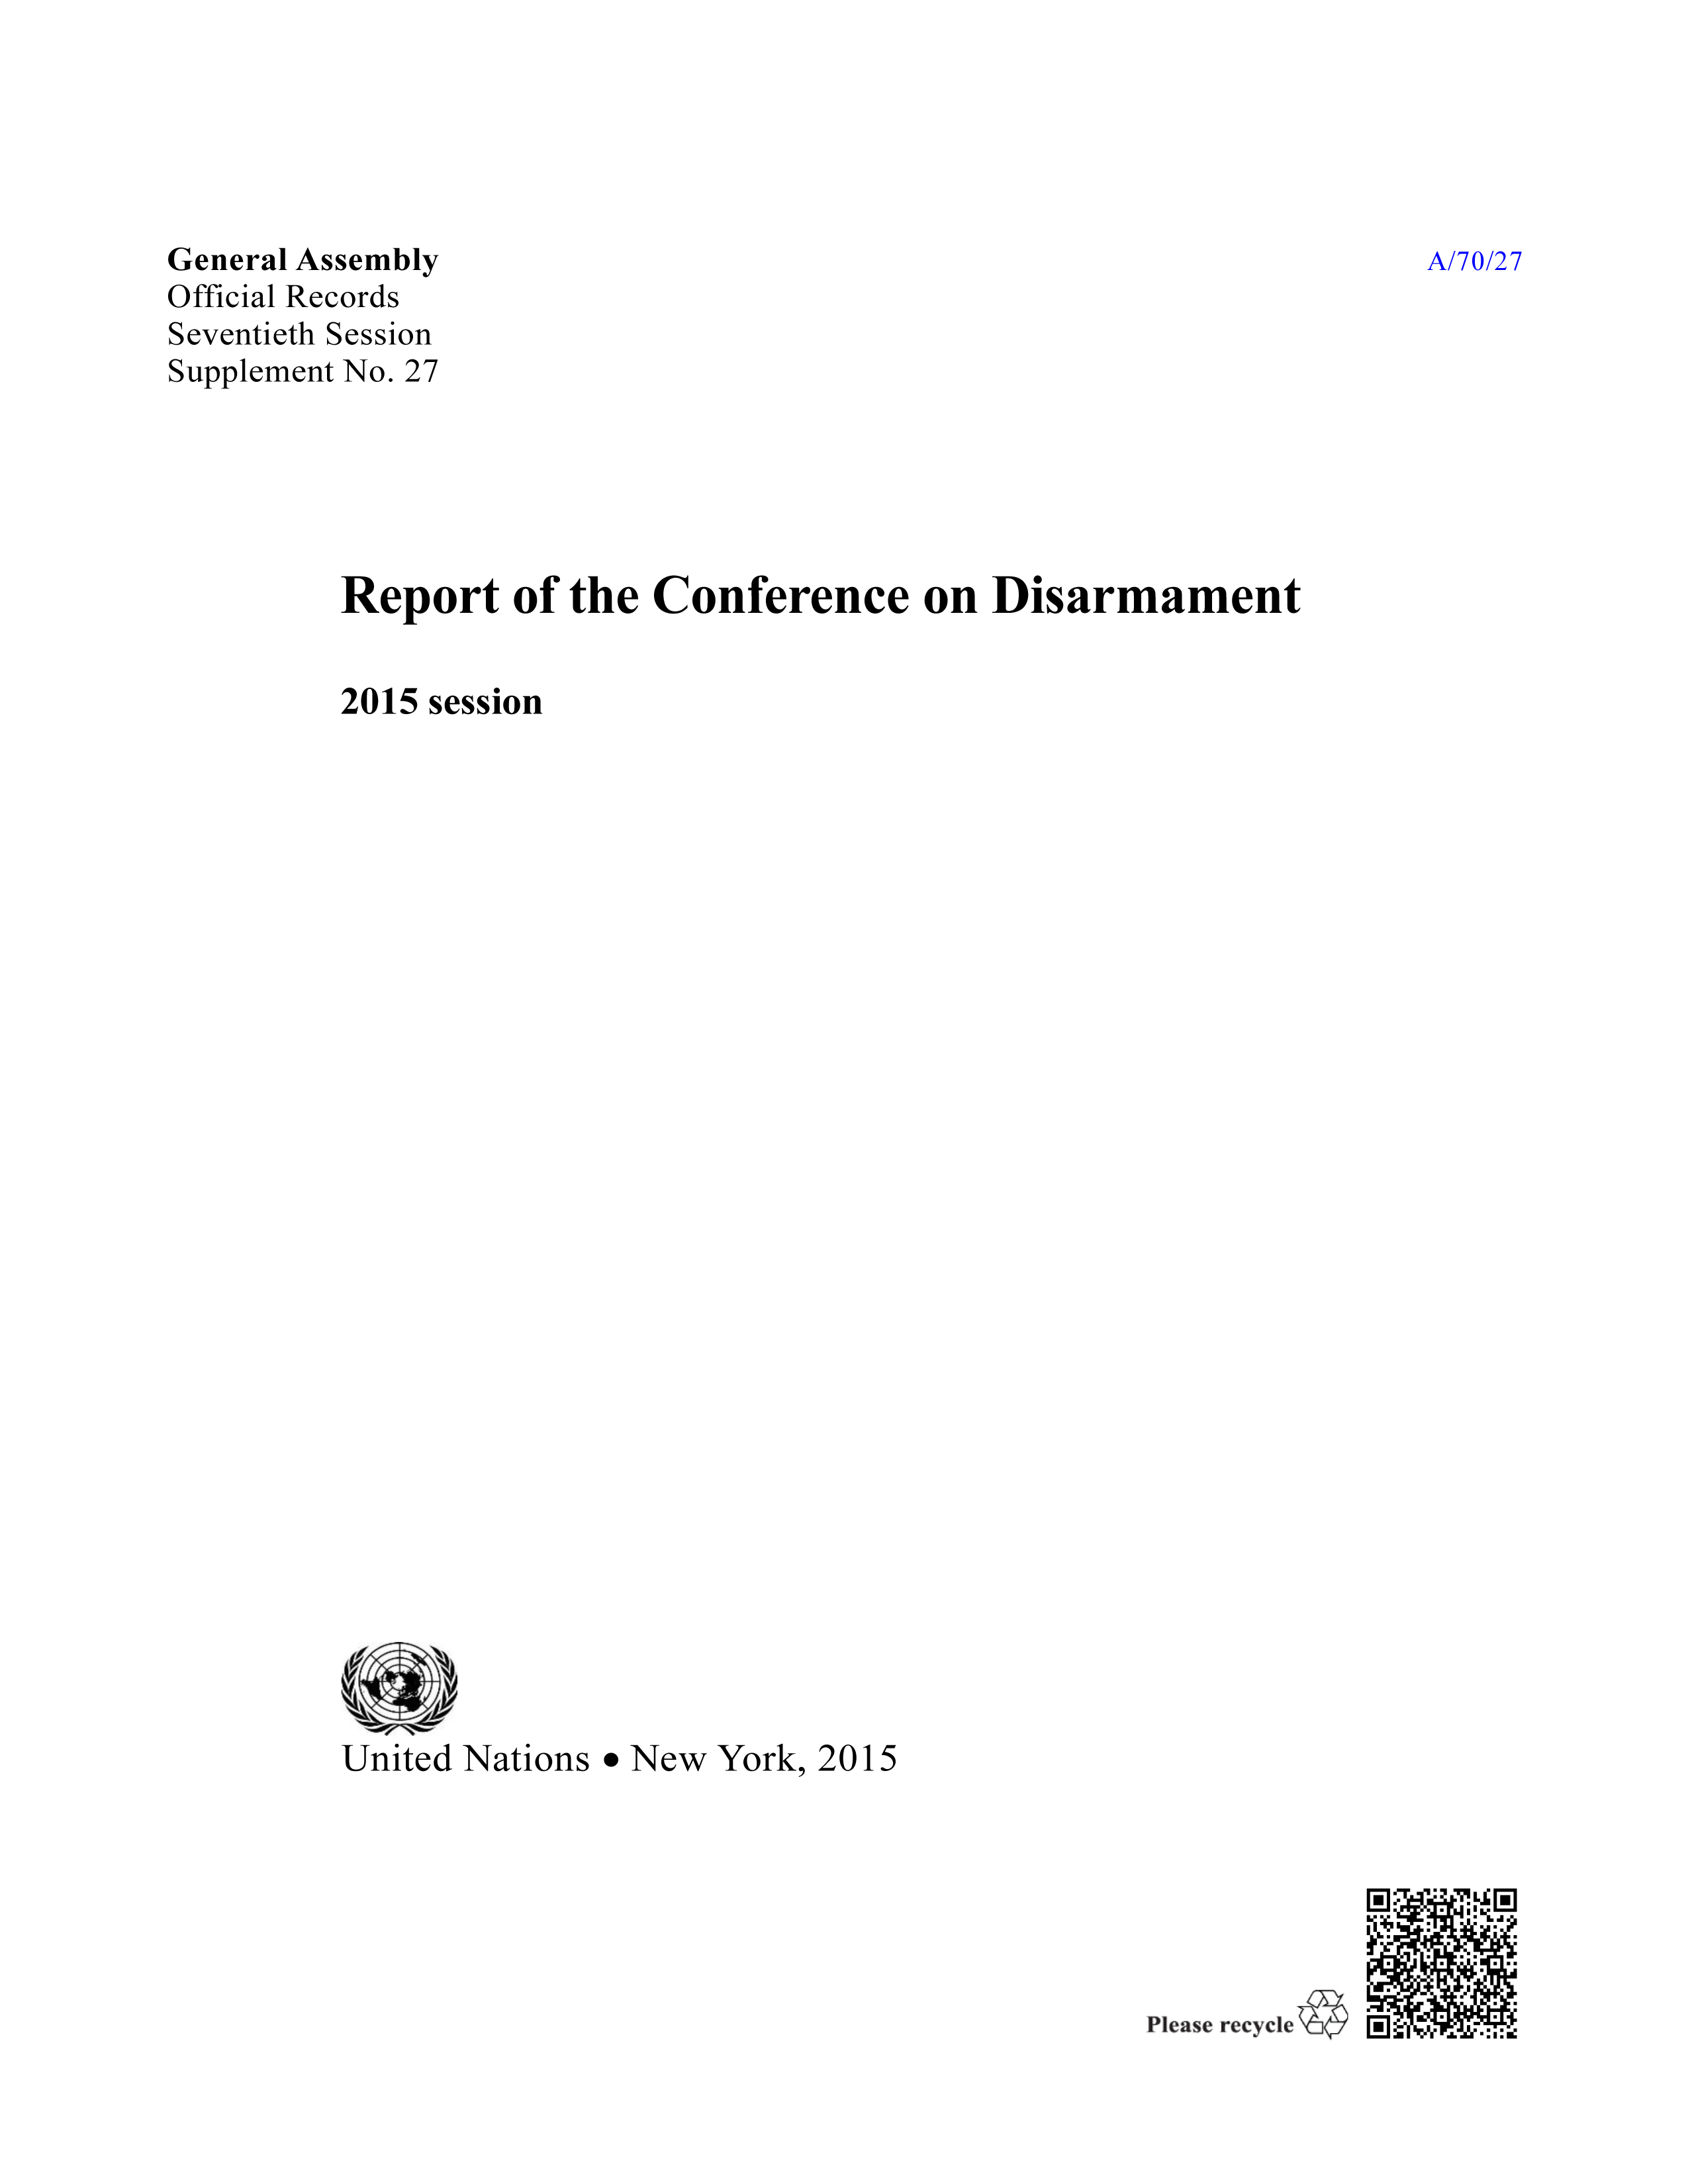 image of Report of the Conference on Disarmament: 2015 Session